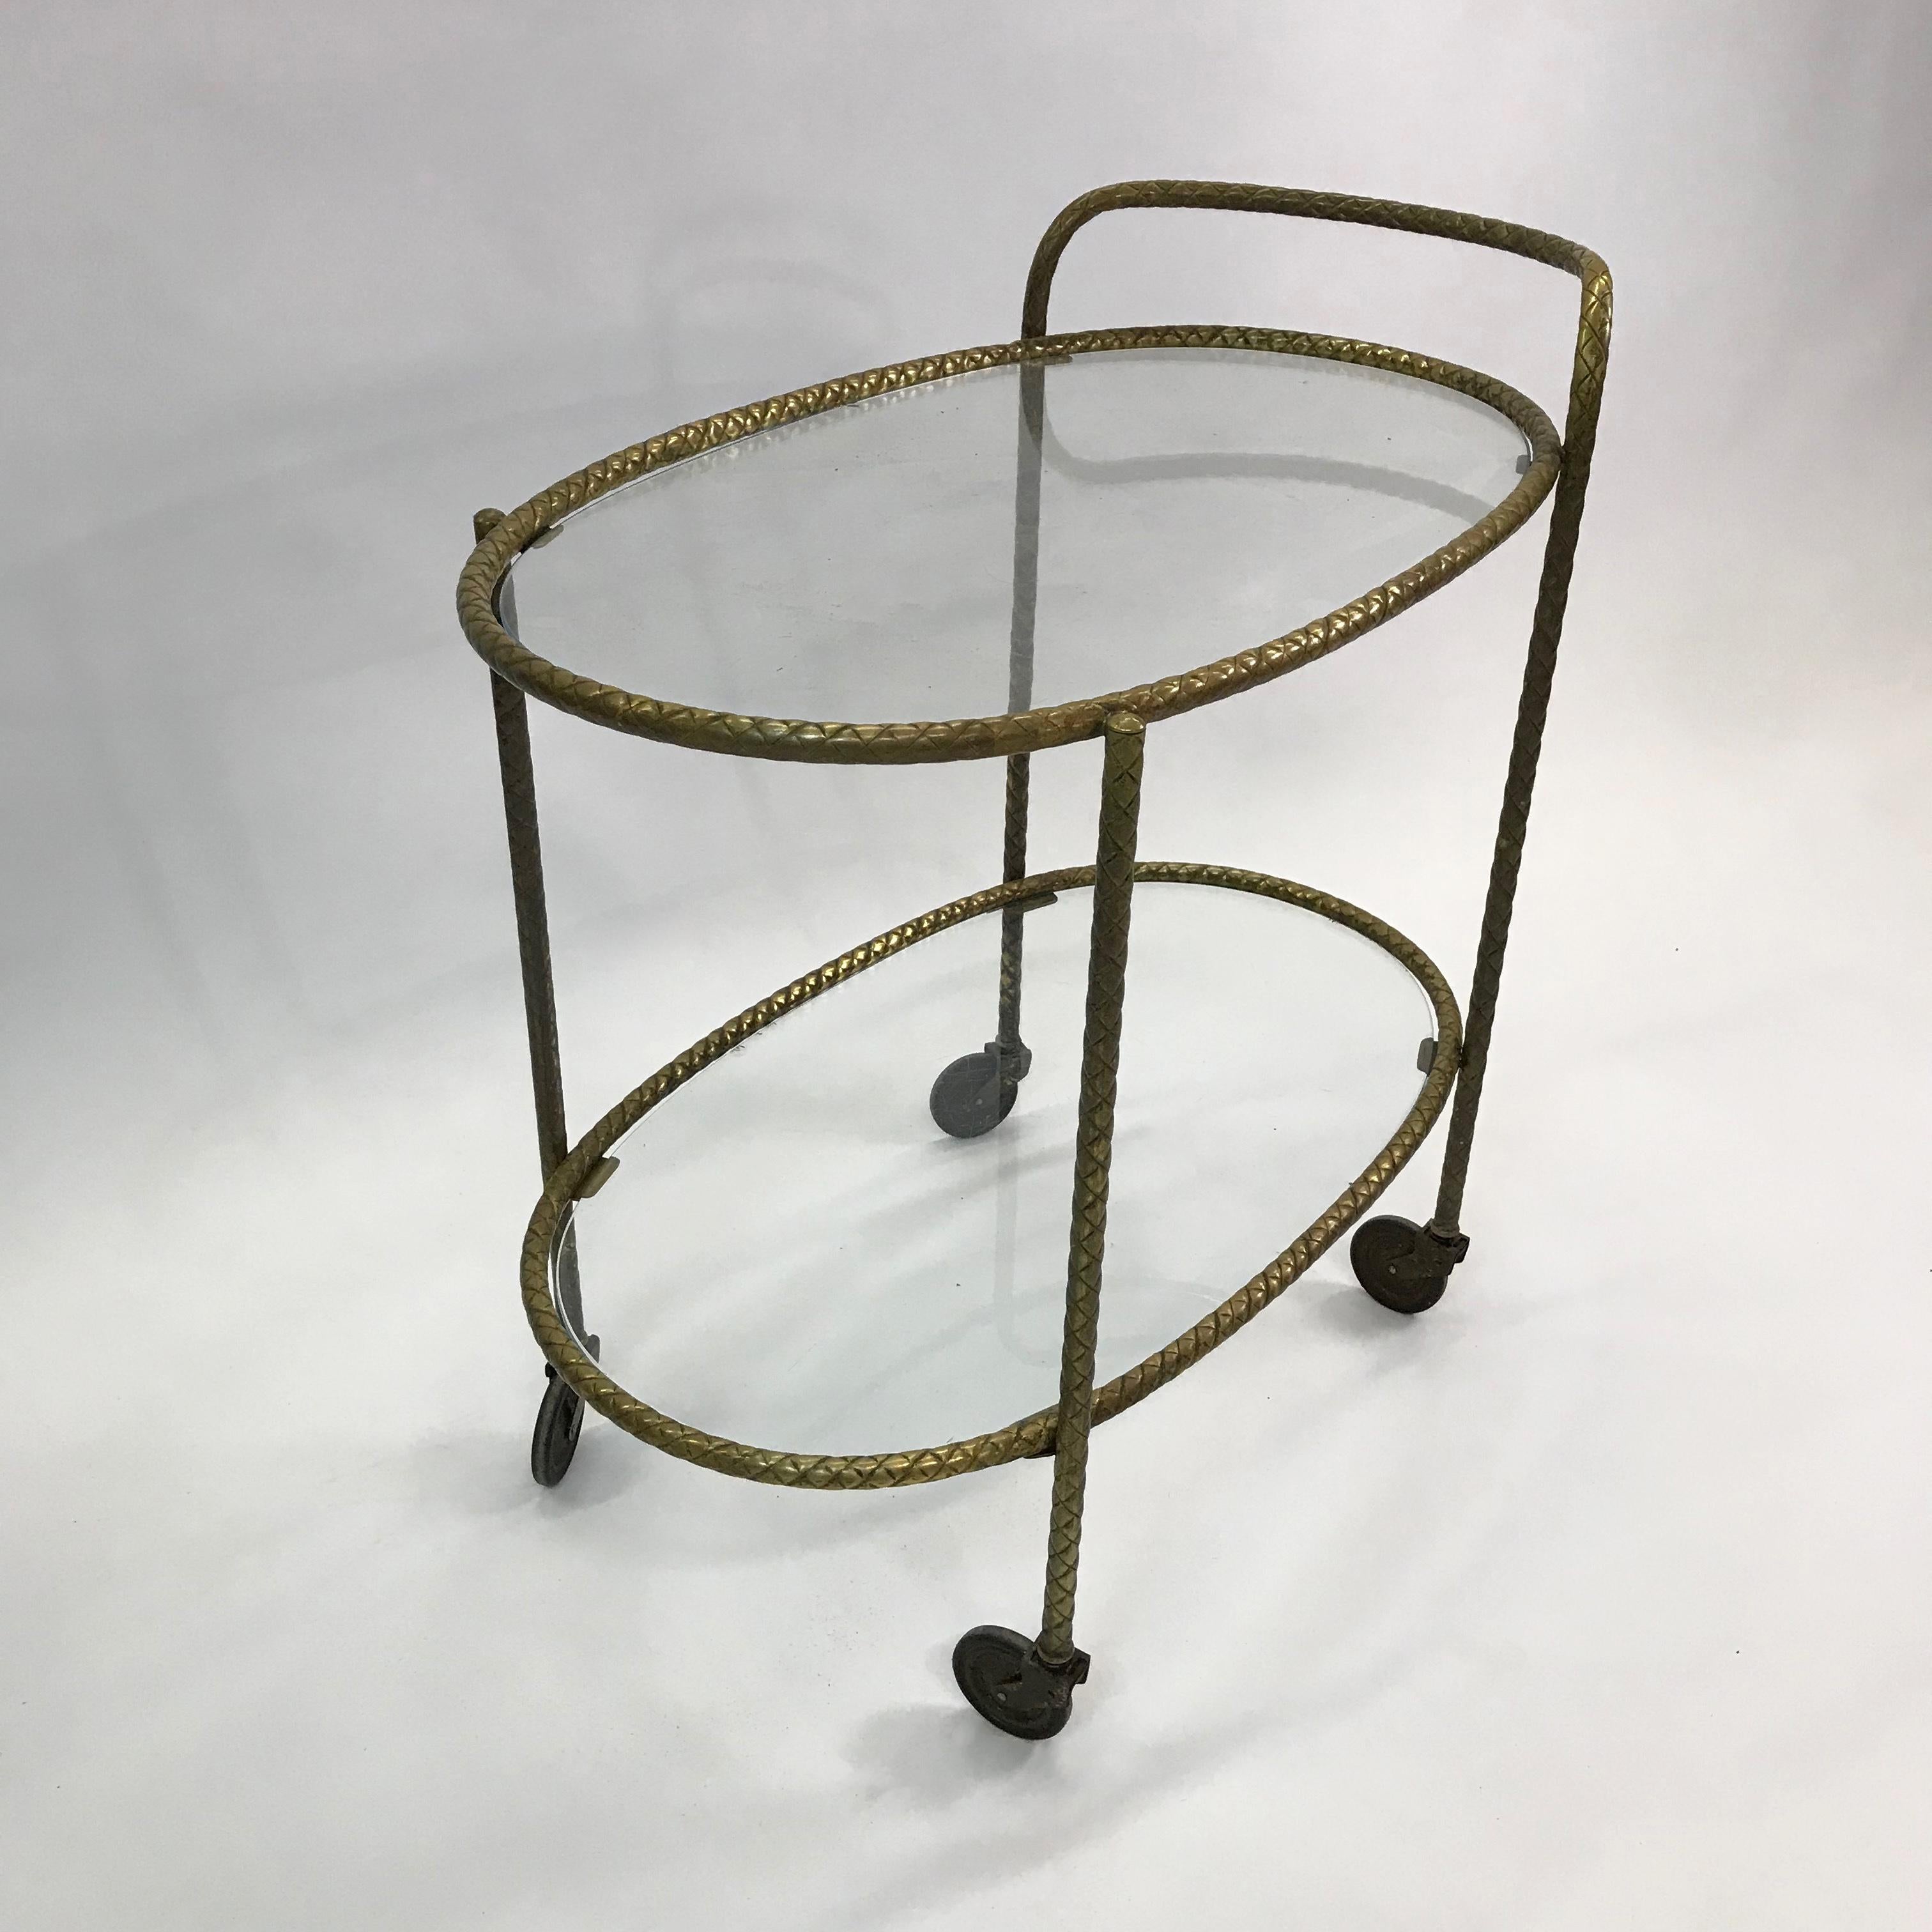 20th Century Hollywood Regency Two-Tiered Oval Braided Brass Bar Cart Trolley